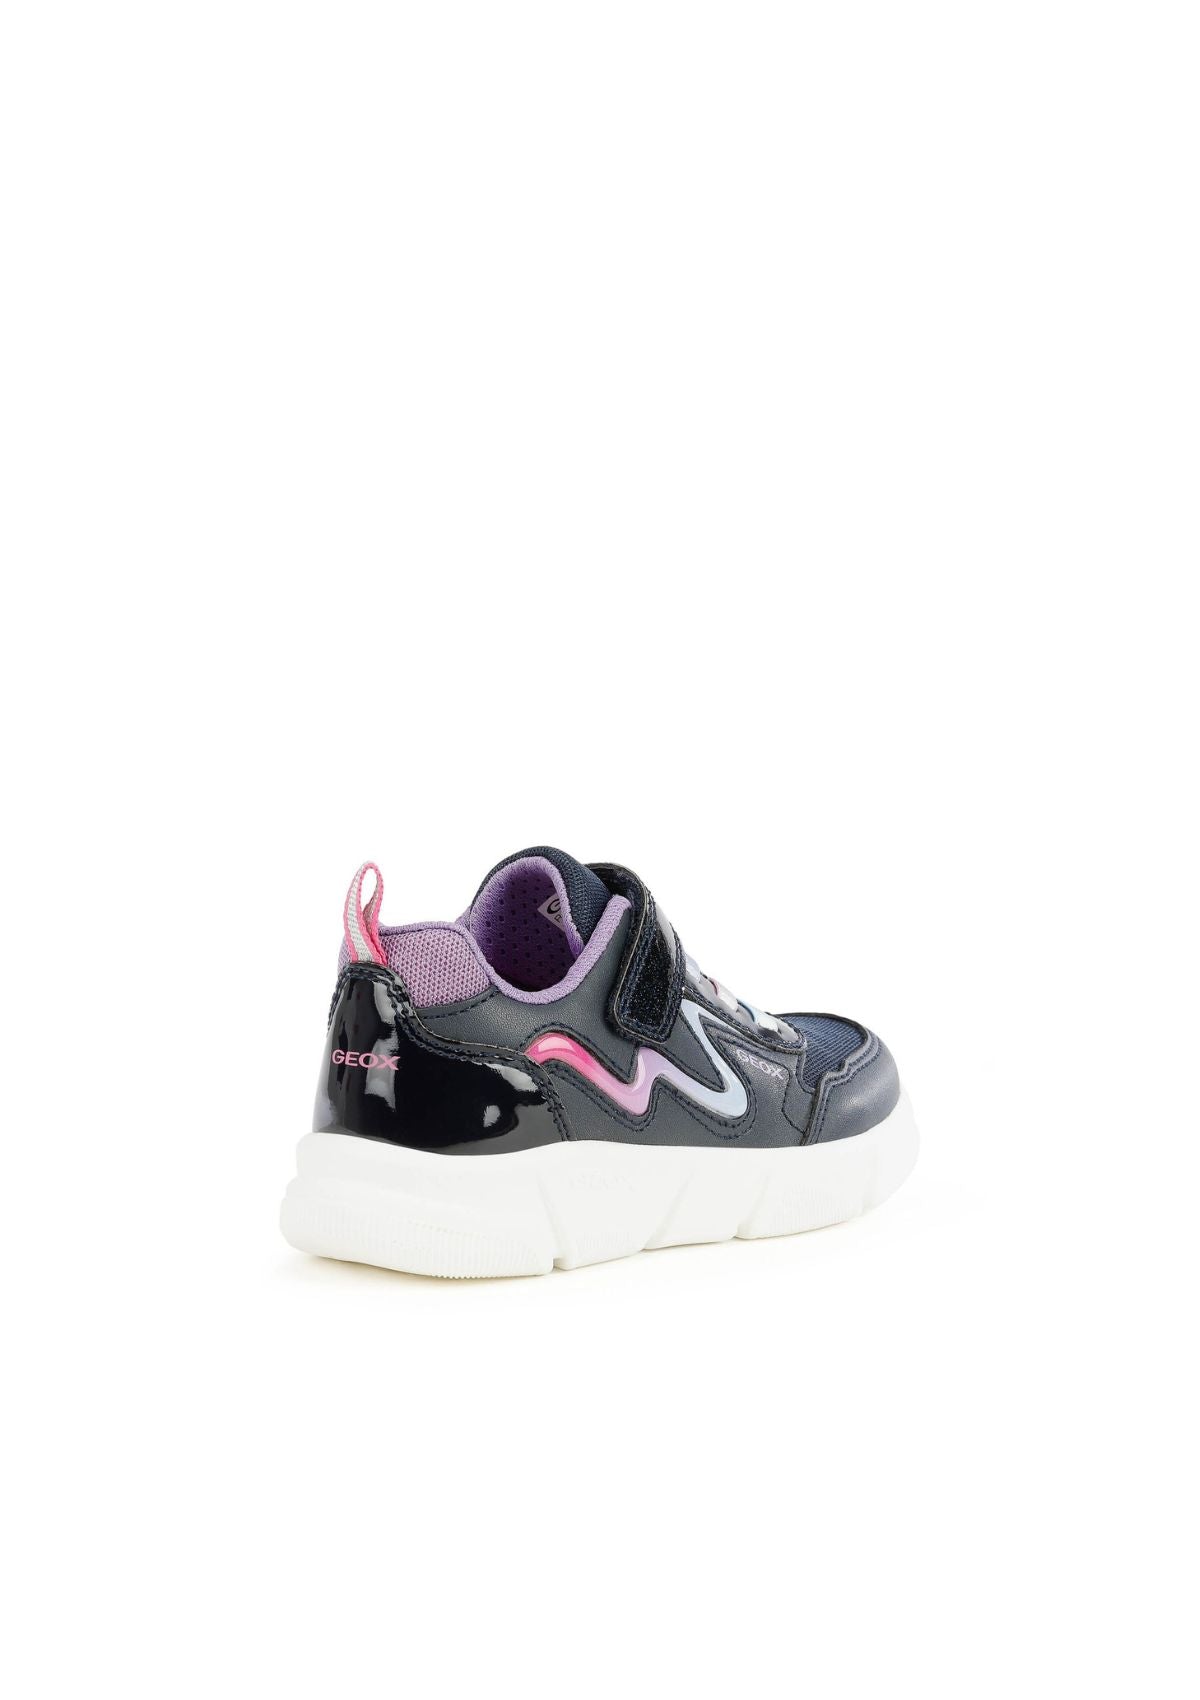 Geox Girls Trainers ARIL Lights-up Navy Lilac sideback